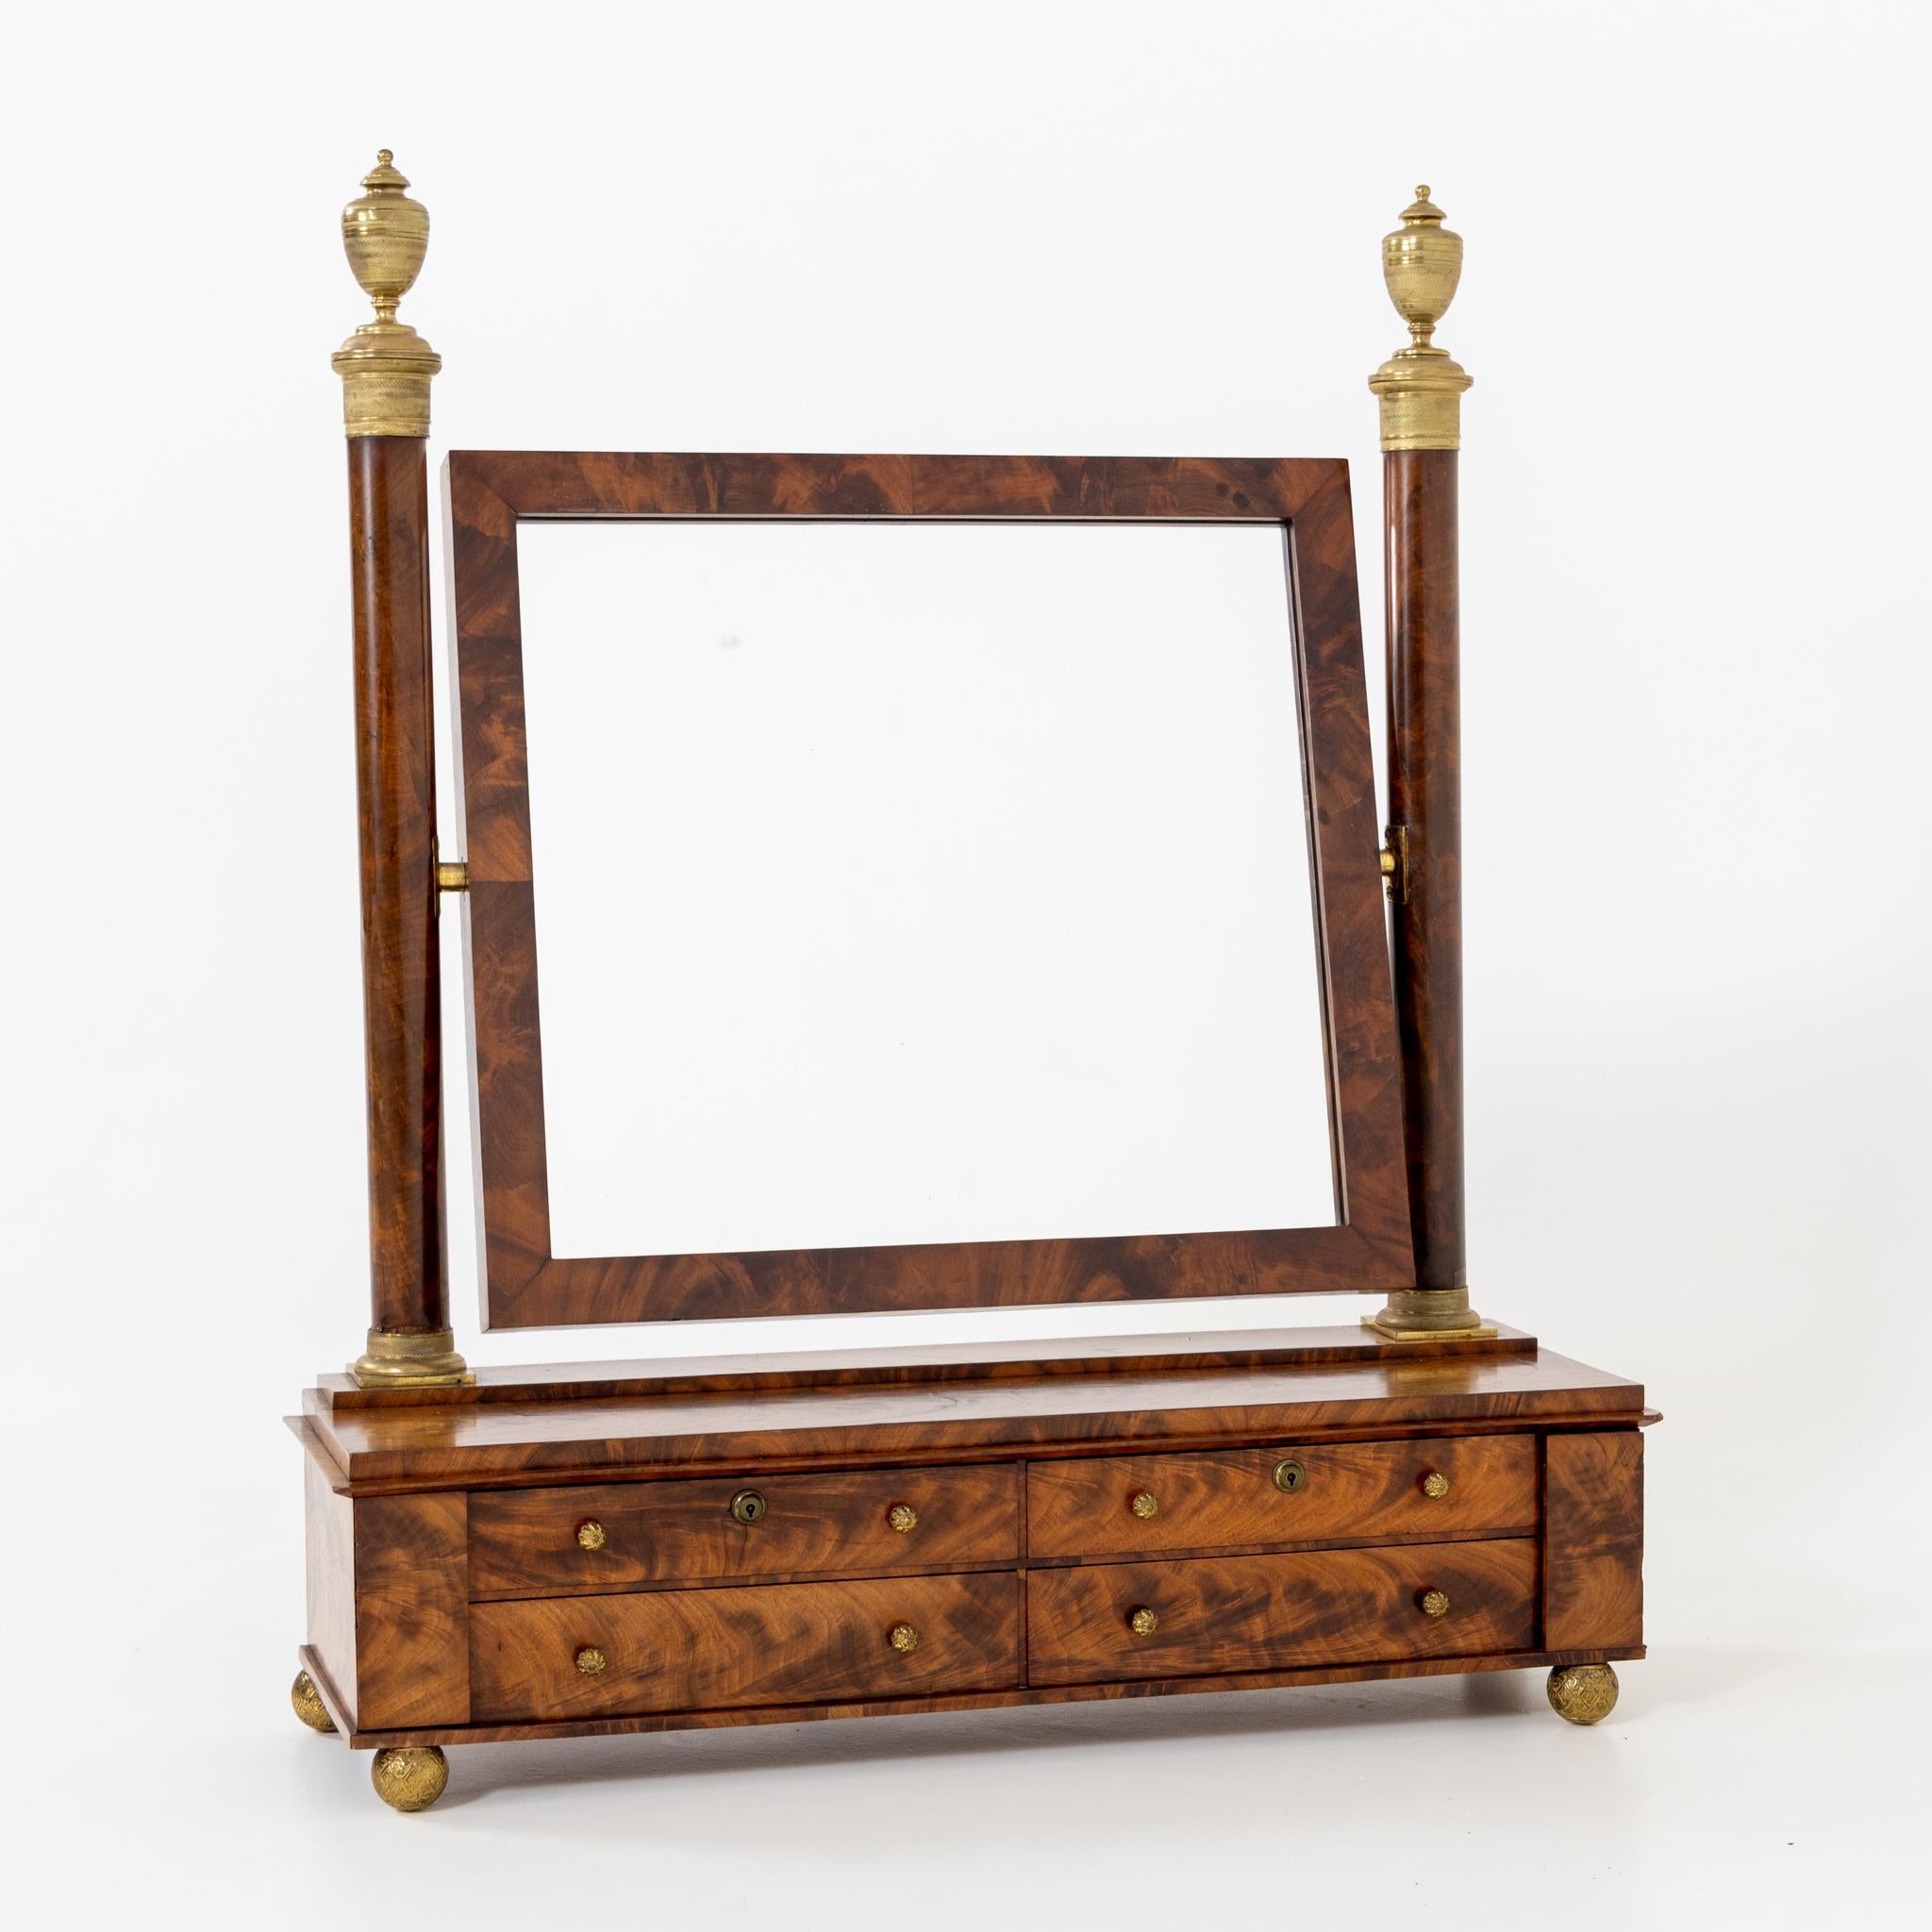 Table Mirror, France Early 19th Century In Good Condition For Sale In Greding, DE